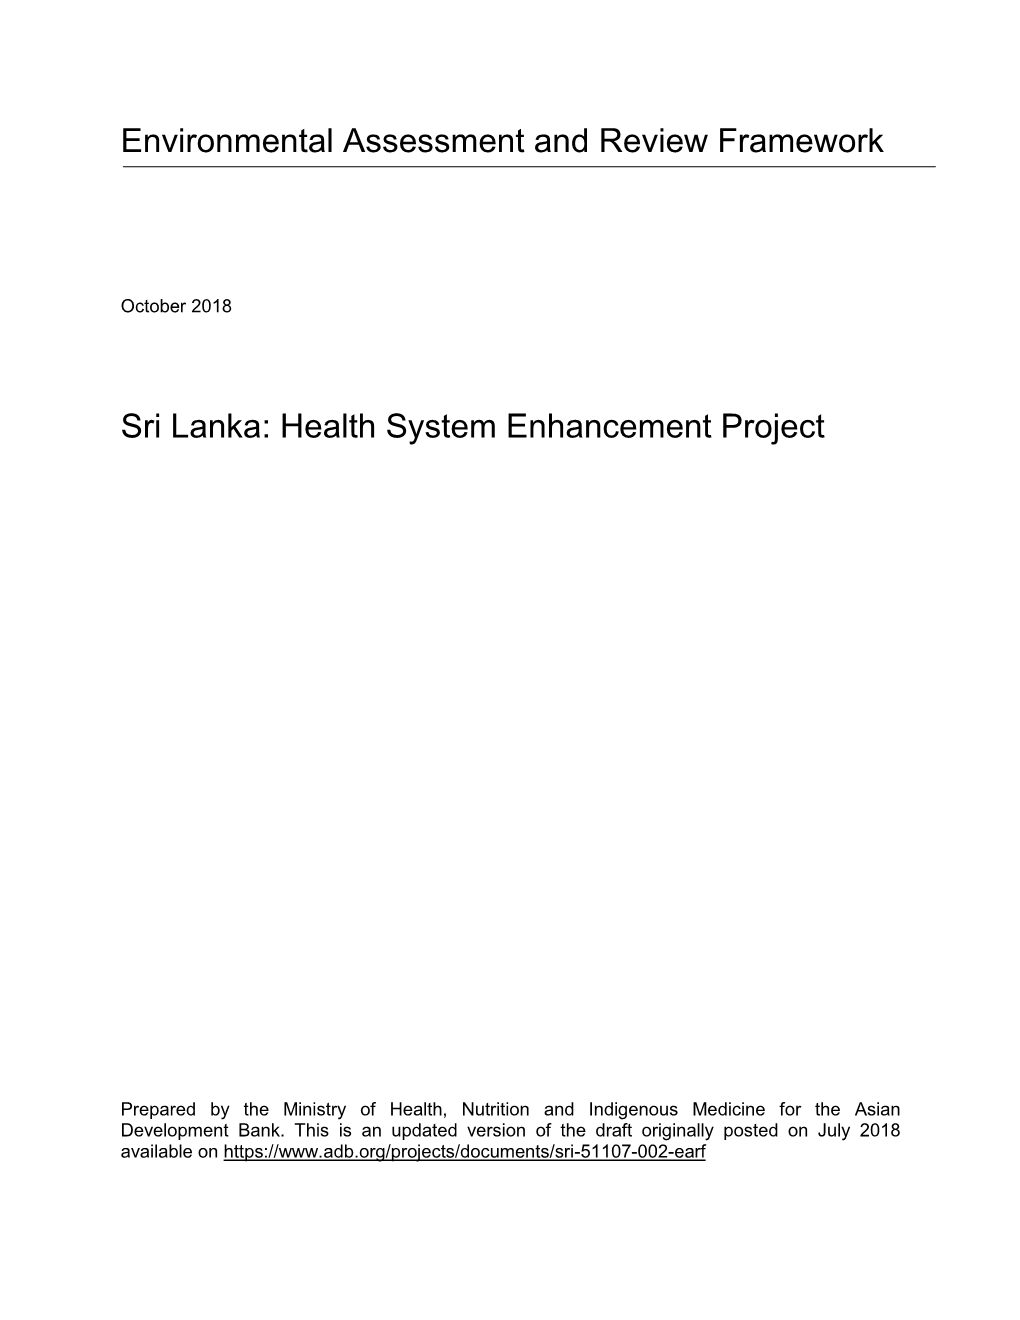 Health System Enhancement Project: Environmental Assessment And